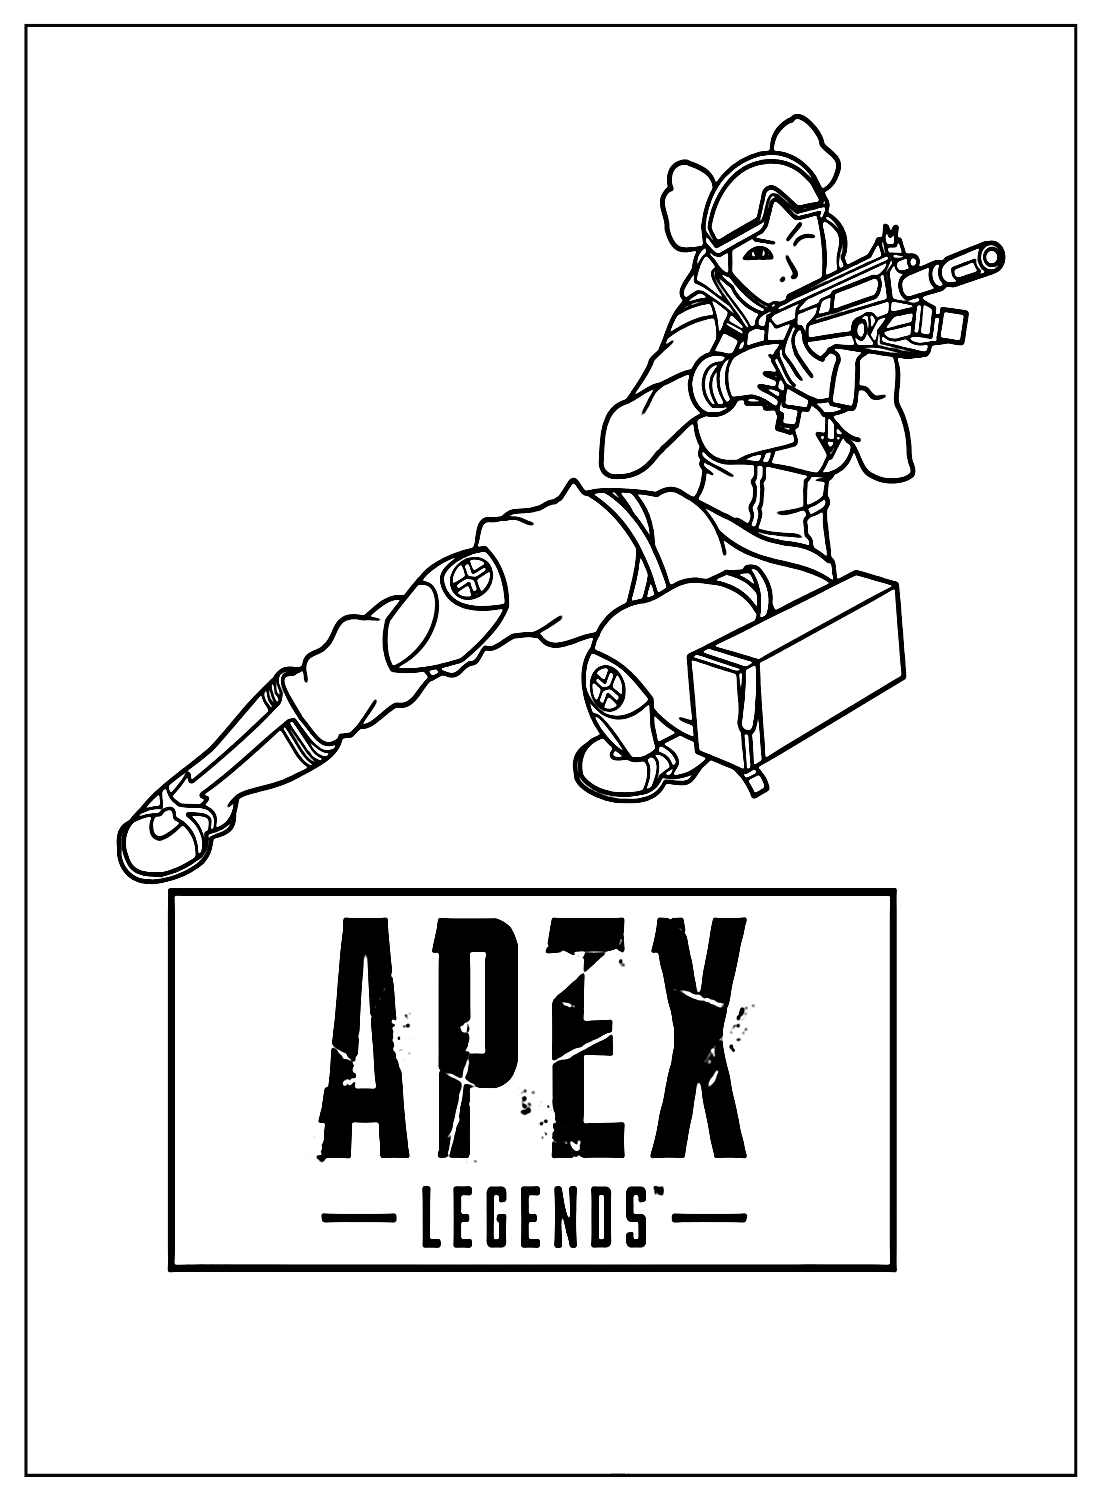 Free Apex Legends Coloring Page from Apex Legends